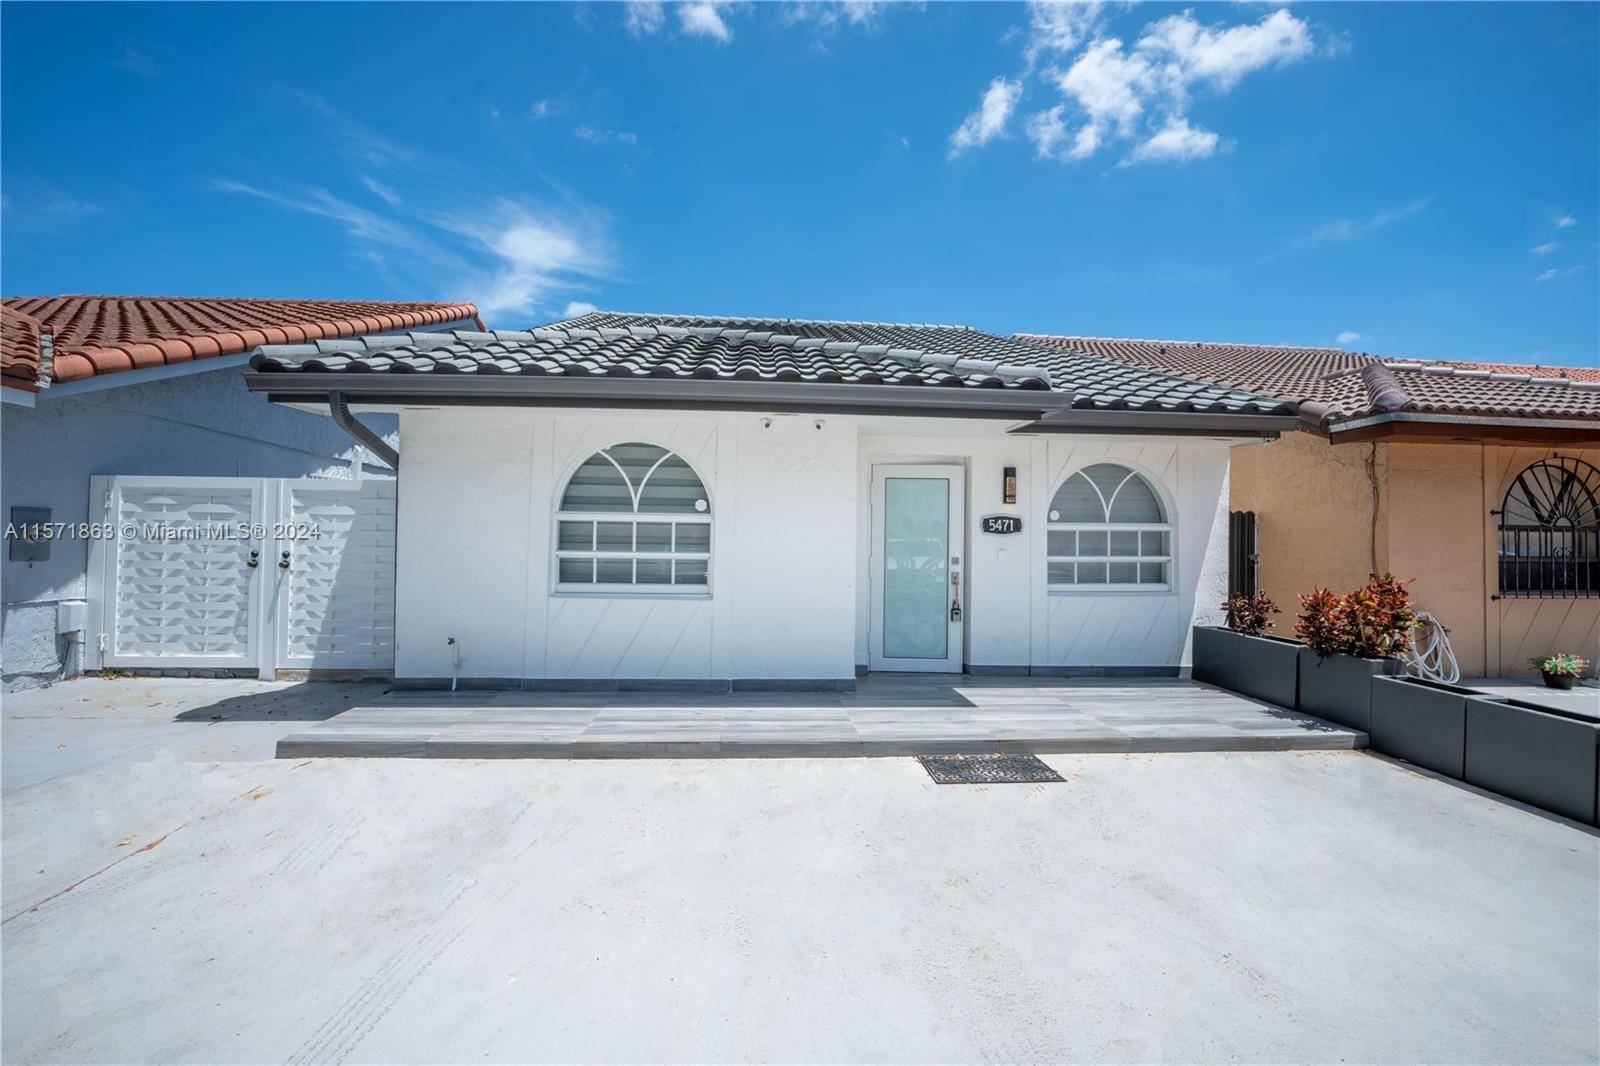 Discover your ideal retreat in Hialeah, Florida, with this charming 4 bedroom, 2 bathroom home.